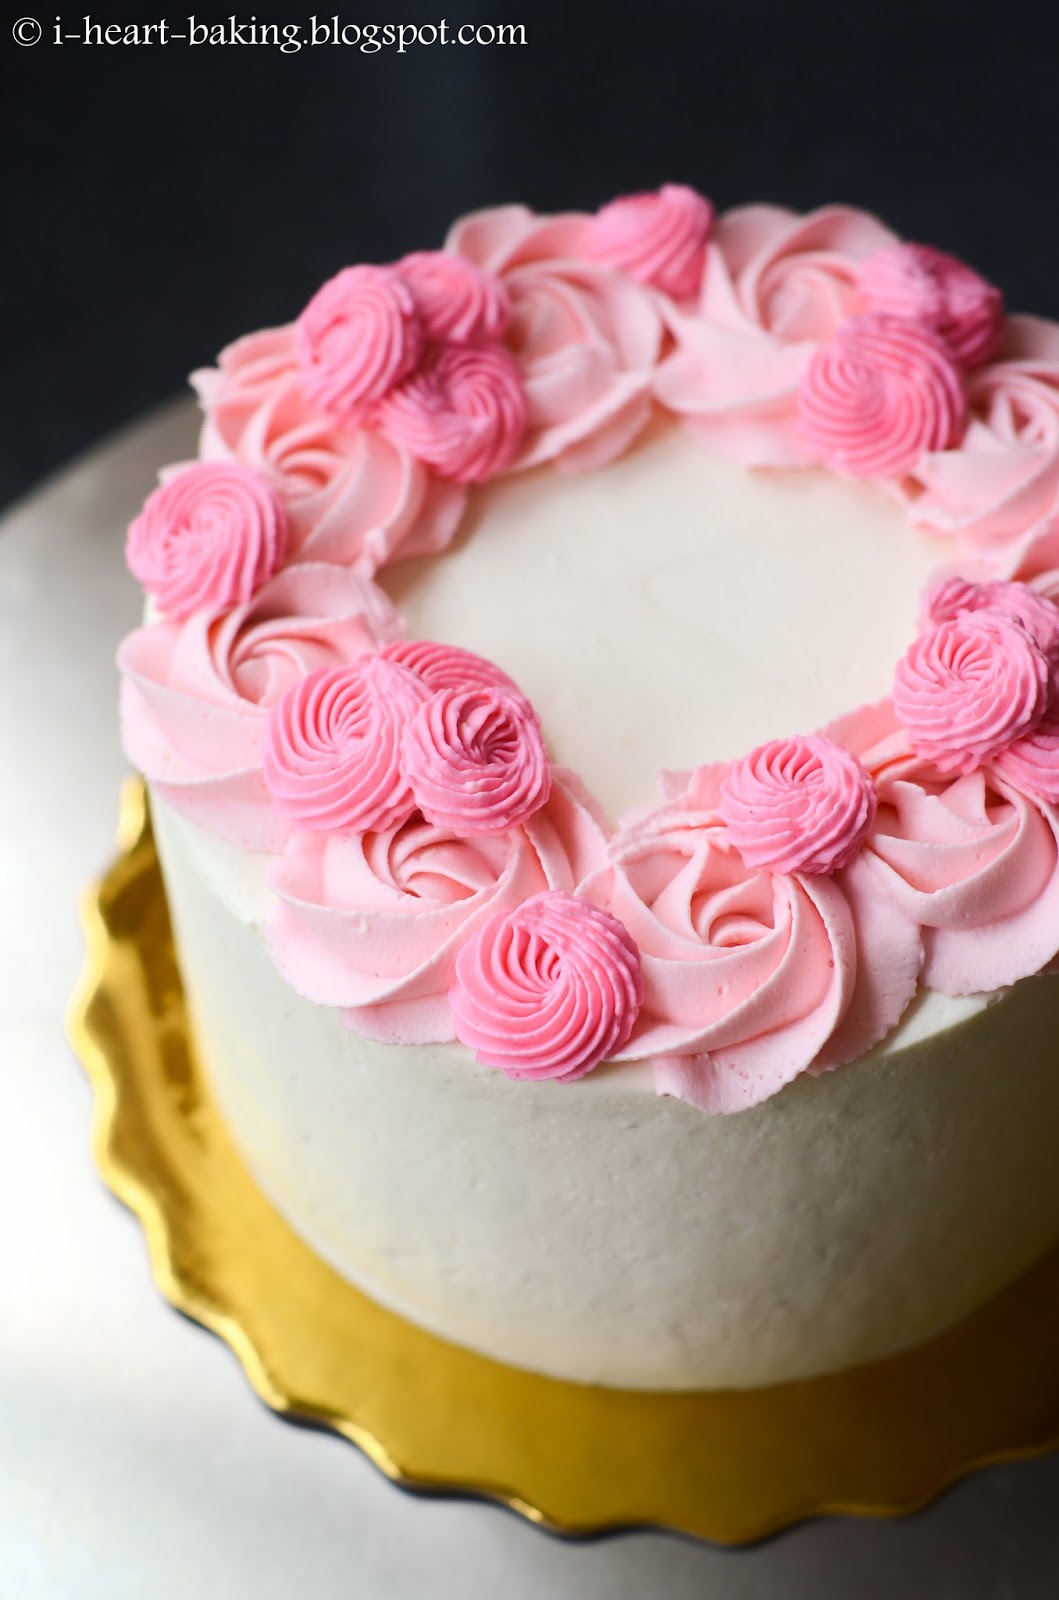 i heart baking!: floral wreath cake for mother's day